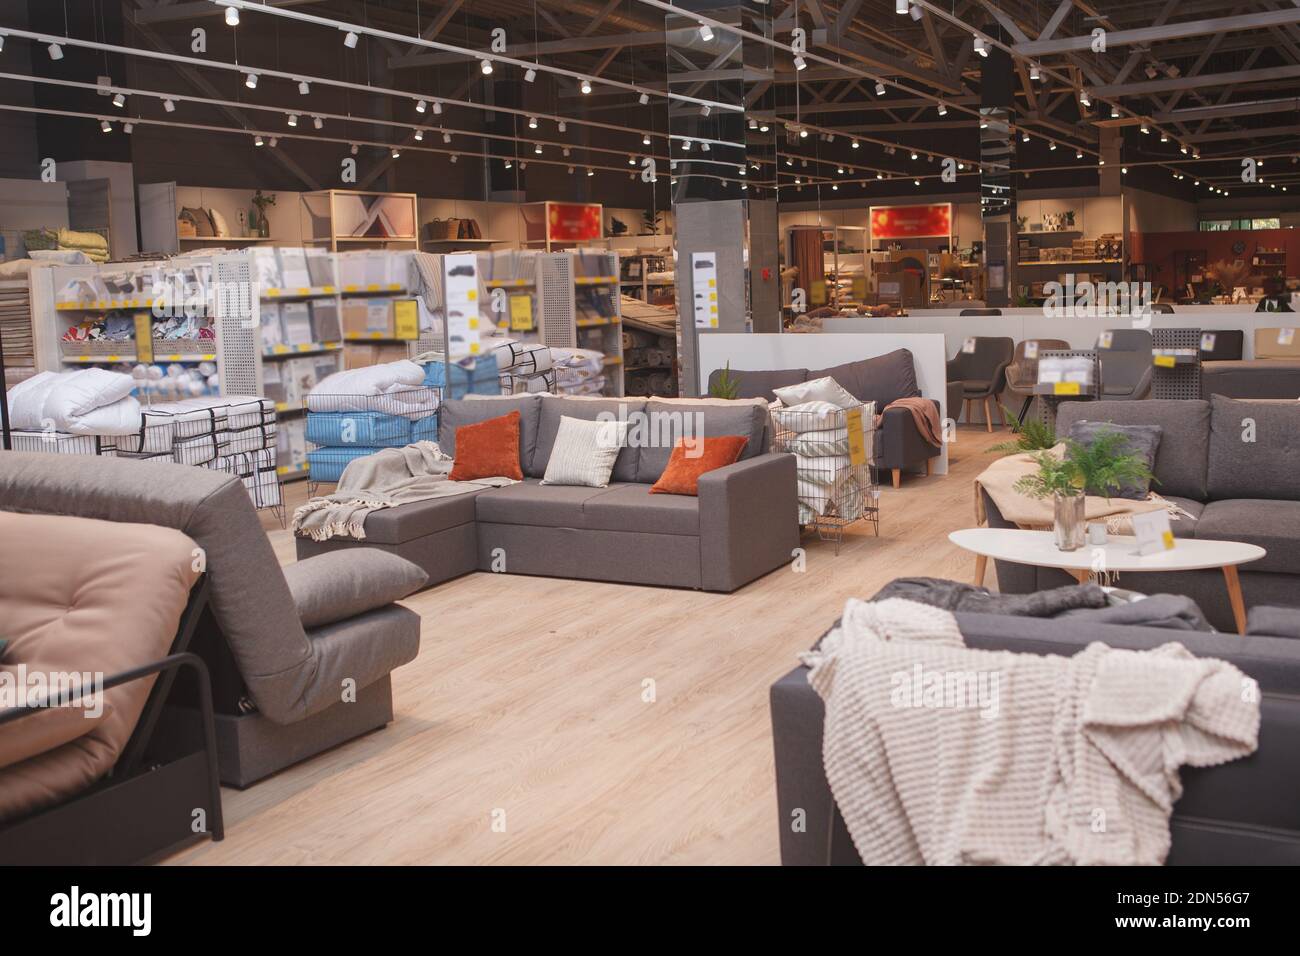 Furniture store with sofas and couches on display for sale, copy space Stock  Photo - Alamy